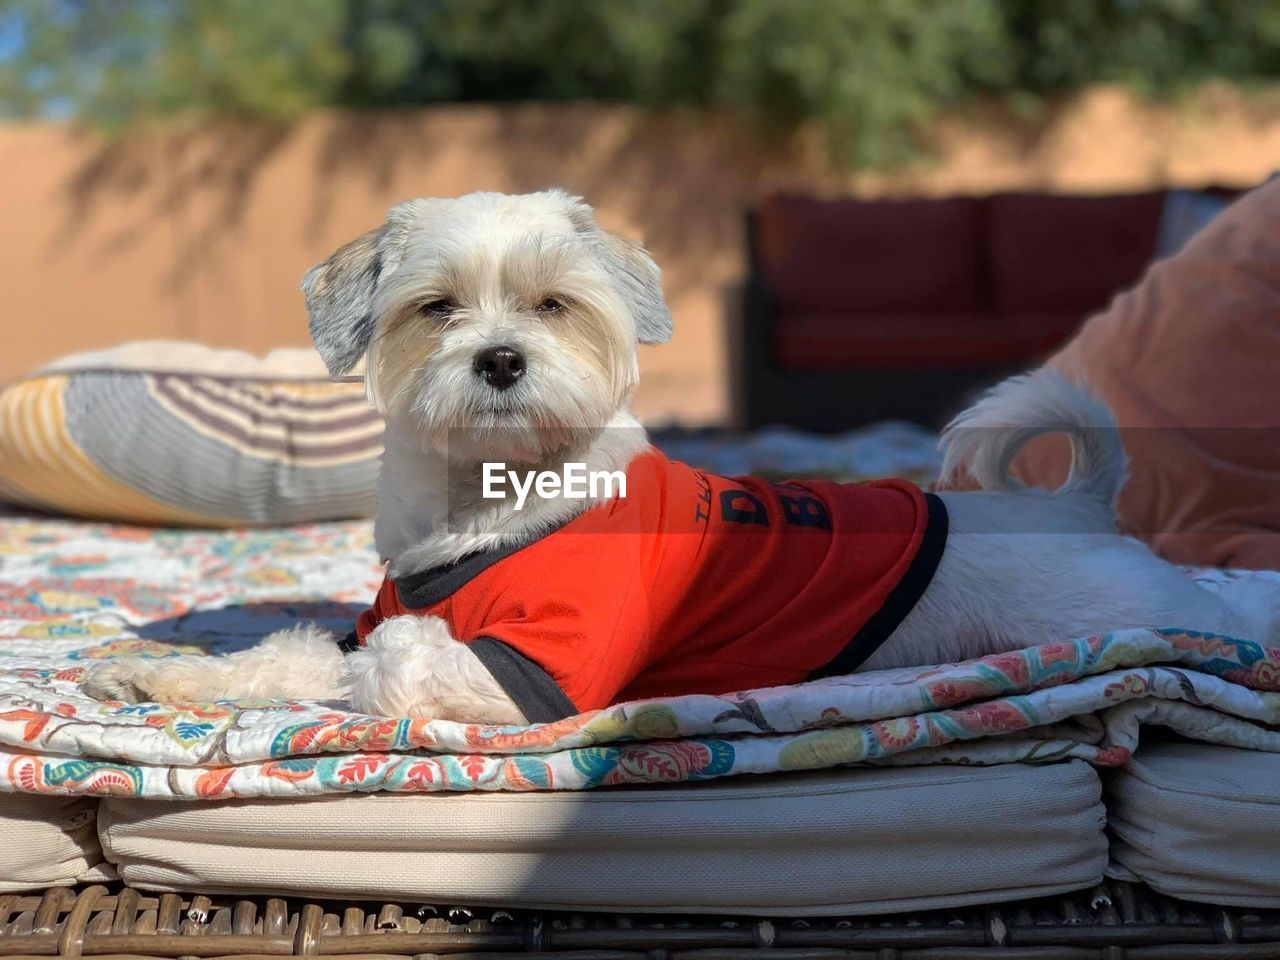 domestic animals, pet, canine, dog, mammal, one animal, animal themes, animal, lap dog, cute, puppy, morkie, portrait, maltese, clothing, relaxation, sitting, lifestyles, young animal, dog bed, focus on foreground, looking at camera, furniture, purebred dog